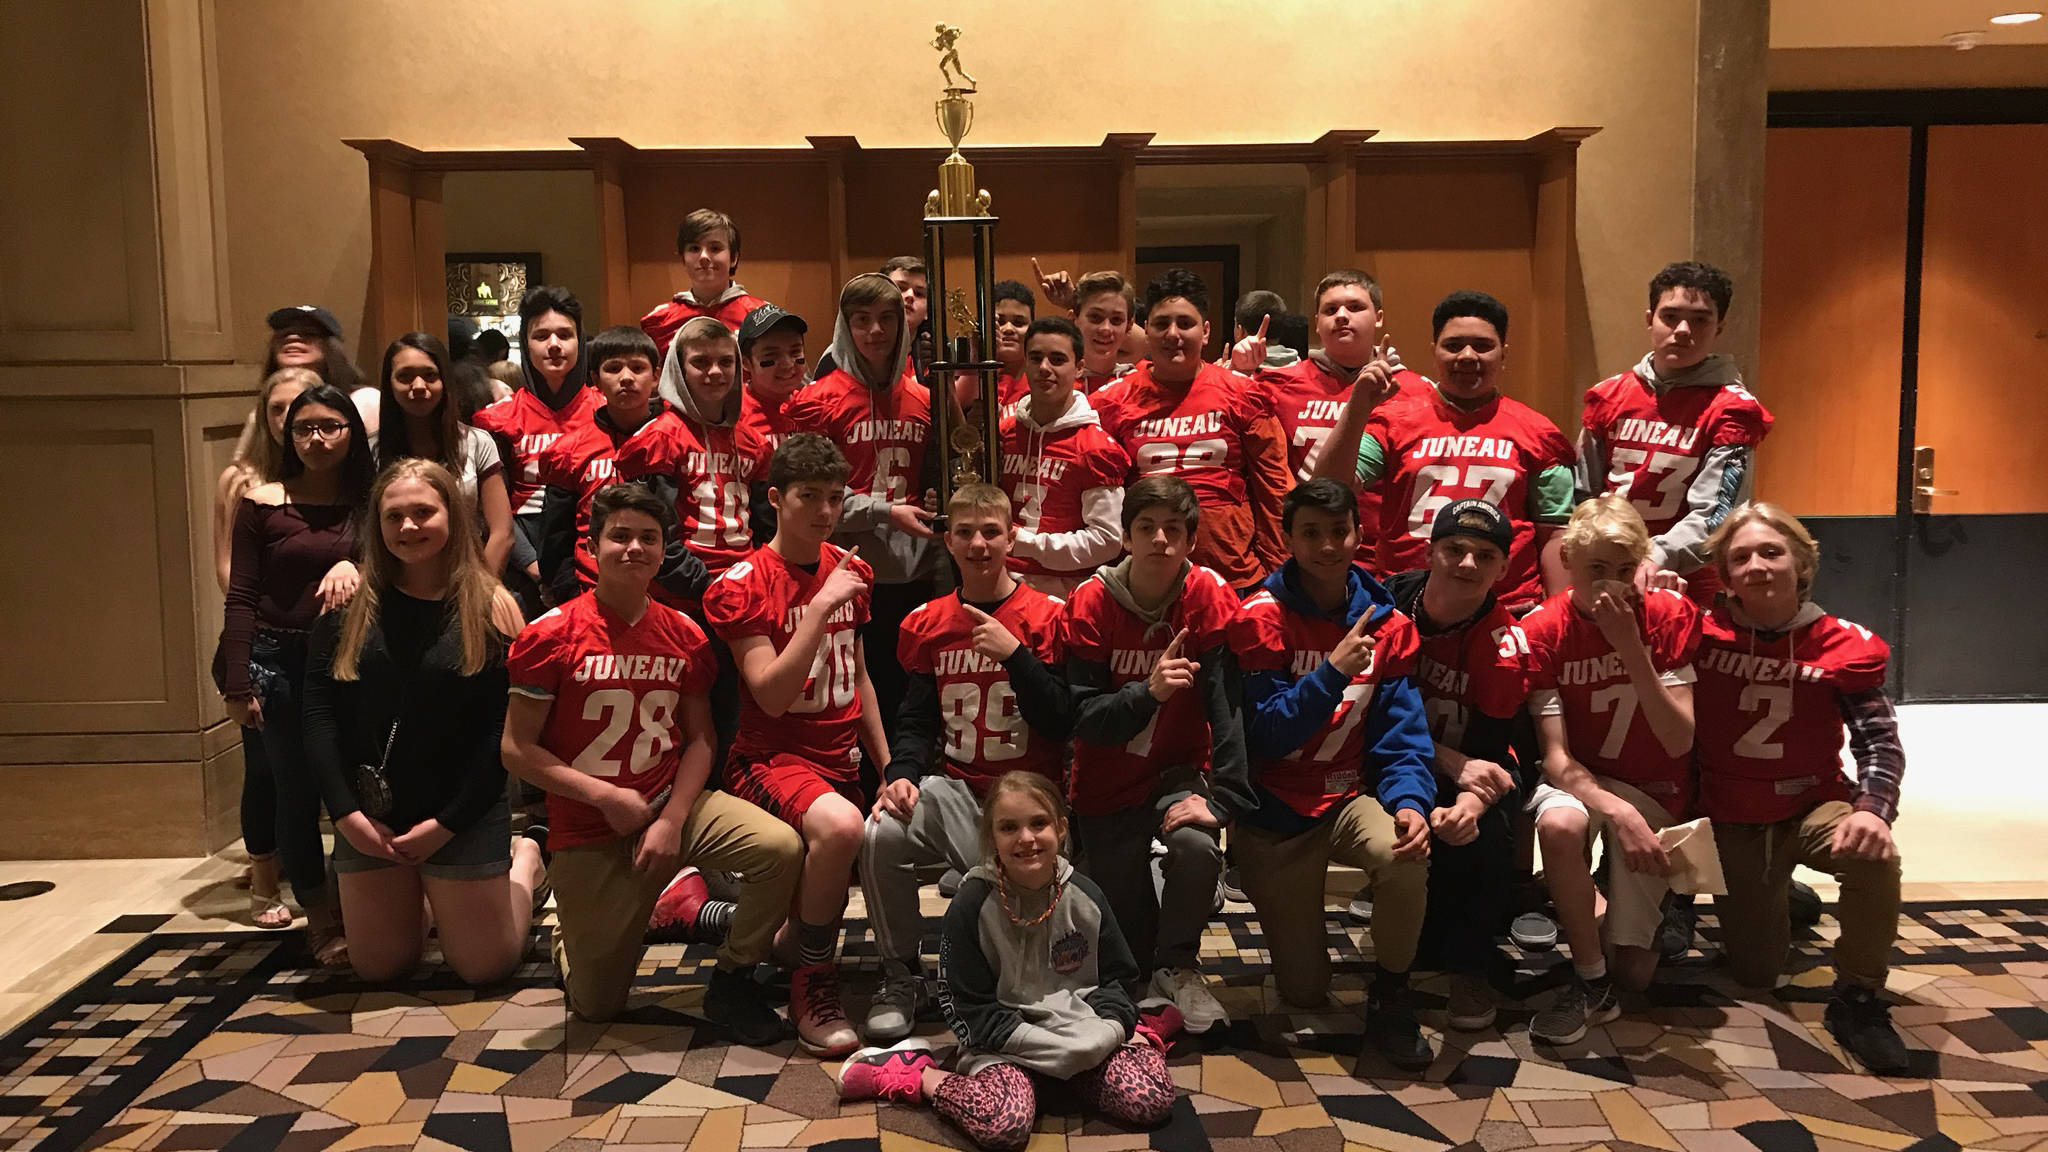 The Juneau Youth Football League 49ers celebrate their 13U Central championship at the National Youth Football Championships in Las Vegas on Saturday, Nov. 25, 2017. (Photo courtesy of Chris Connally)